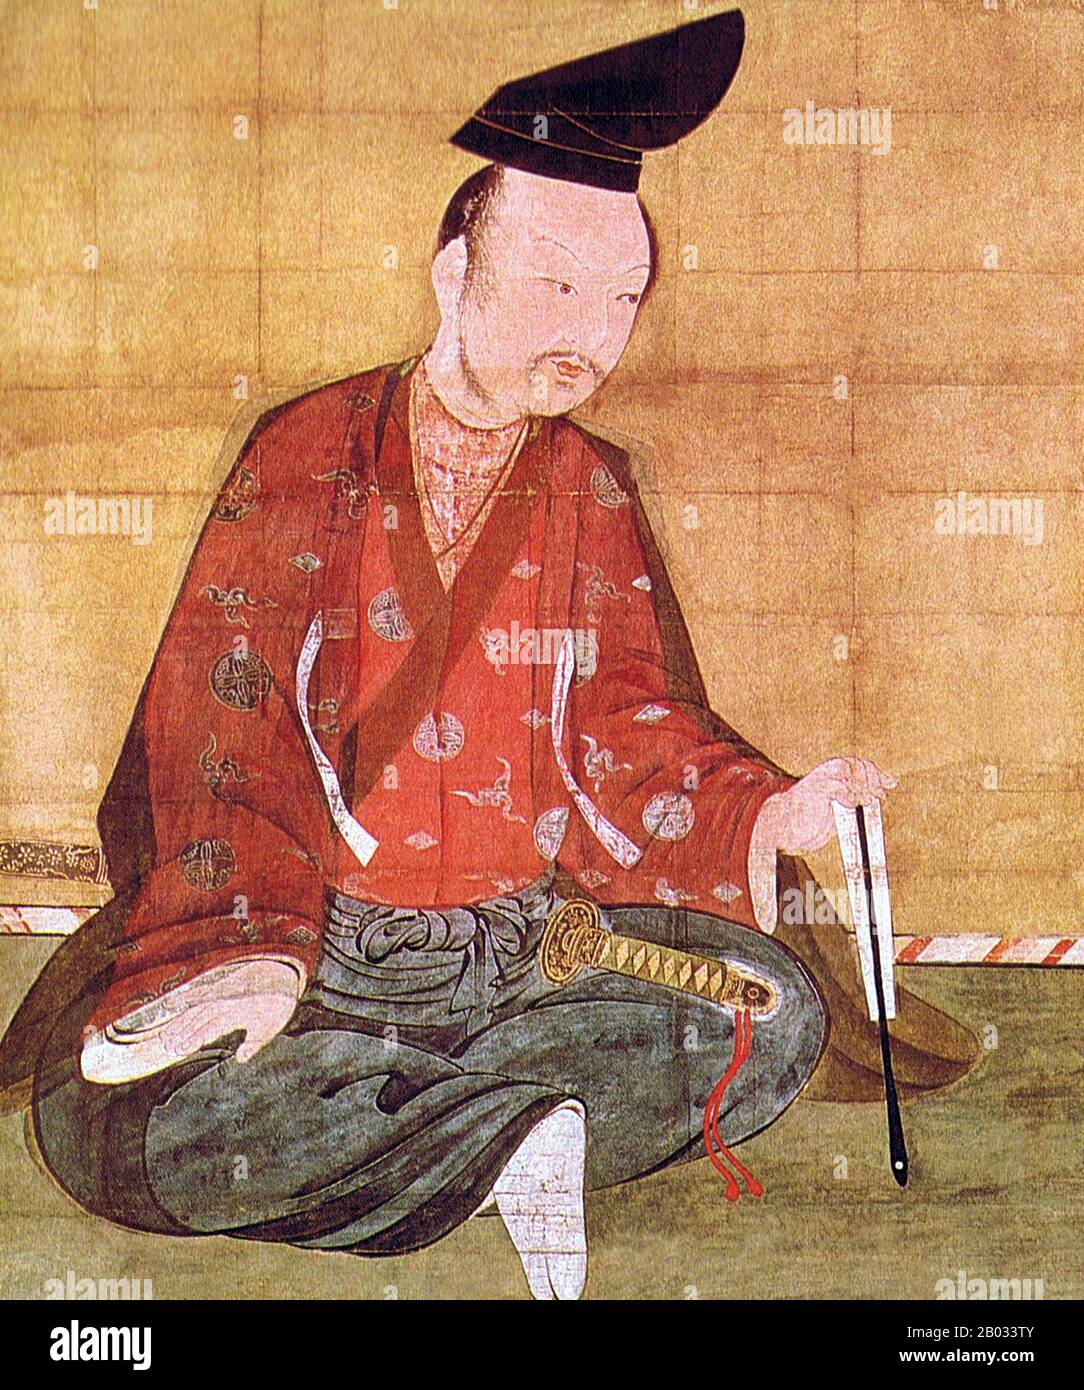 Minamoto no Yoshitsune (1159 – June 15, 1189) was a general of the Minamoto clan of Japan in the late Heian and early Kamakura period. Yoshitsune was the ninth son of Minamoto no Yoshitomo, and the third and final son and child that Yoshitomo would father with Tokiwa Gozen.  Despite being a heroic general, Yoshitsune perished at the hands of his allies through treachery; legend has it, though, that he escaped to Hokkaido where he settled. Stock Photo